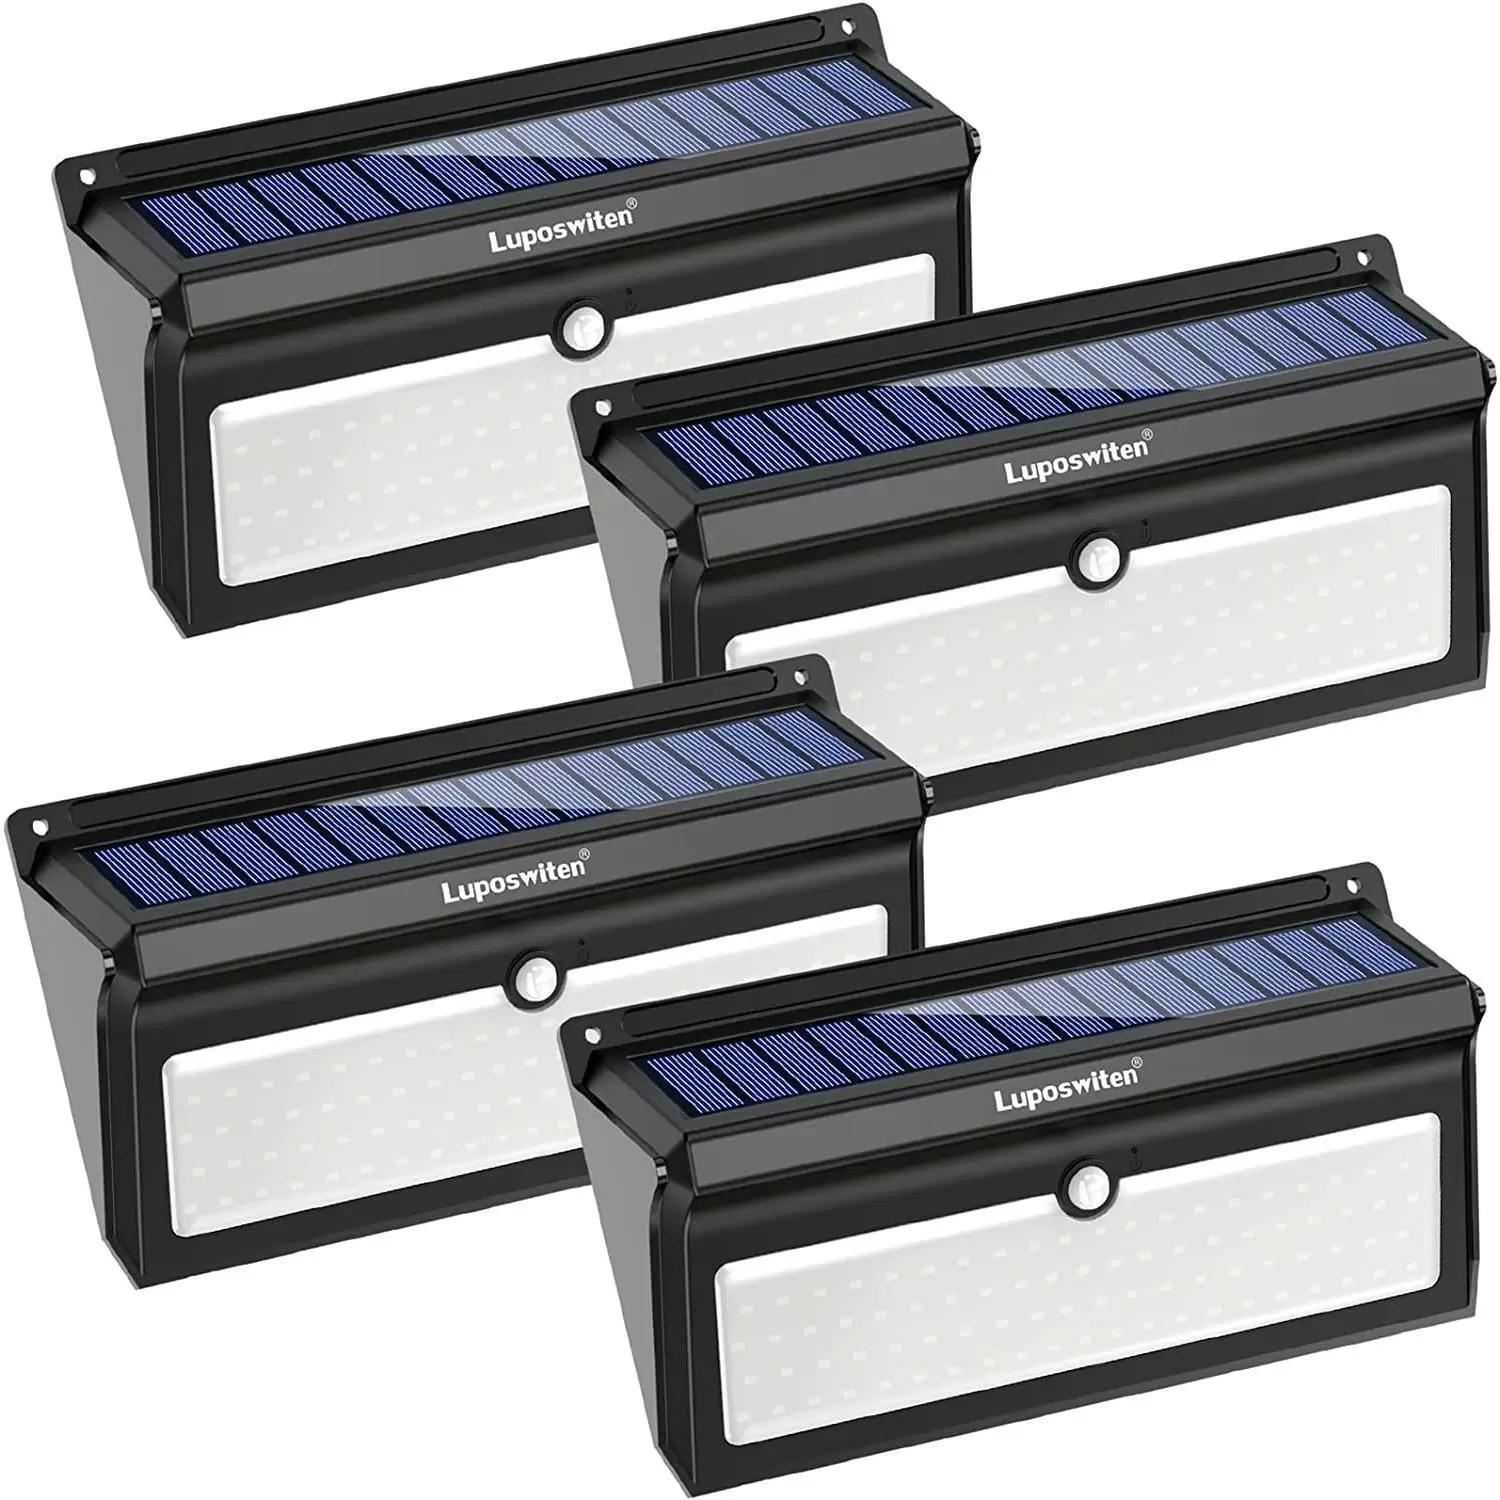 Luposwiten 100 LED Outdoor Solar Lights 4 Pack for $16 Shipped